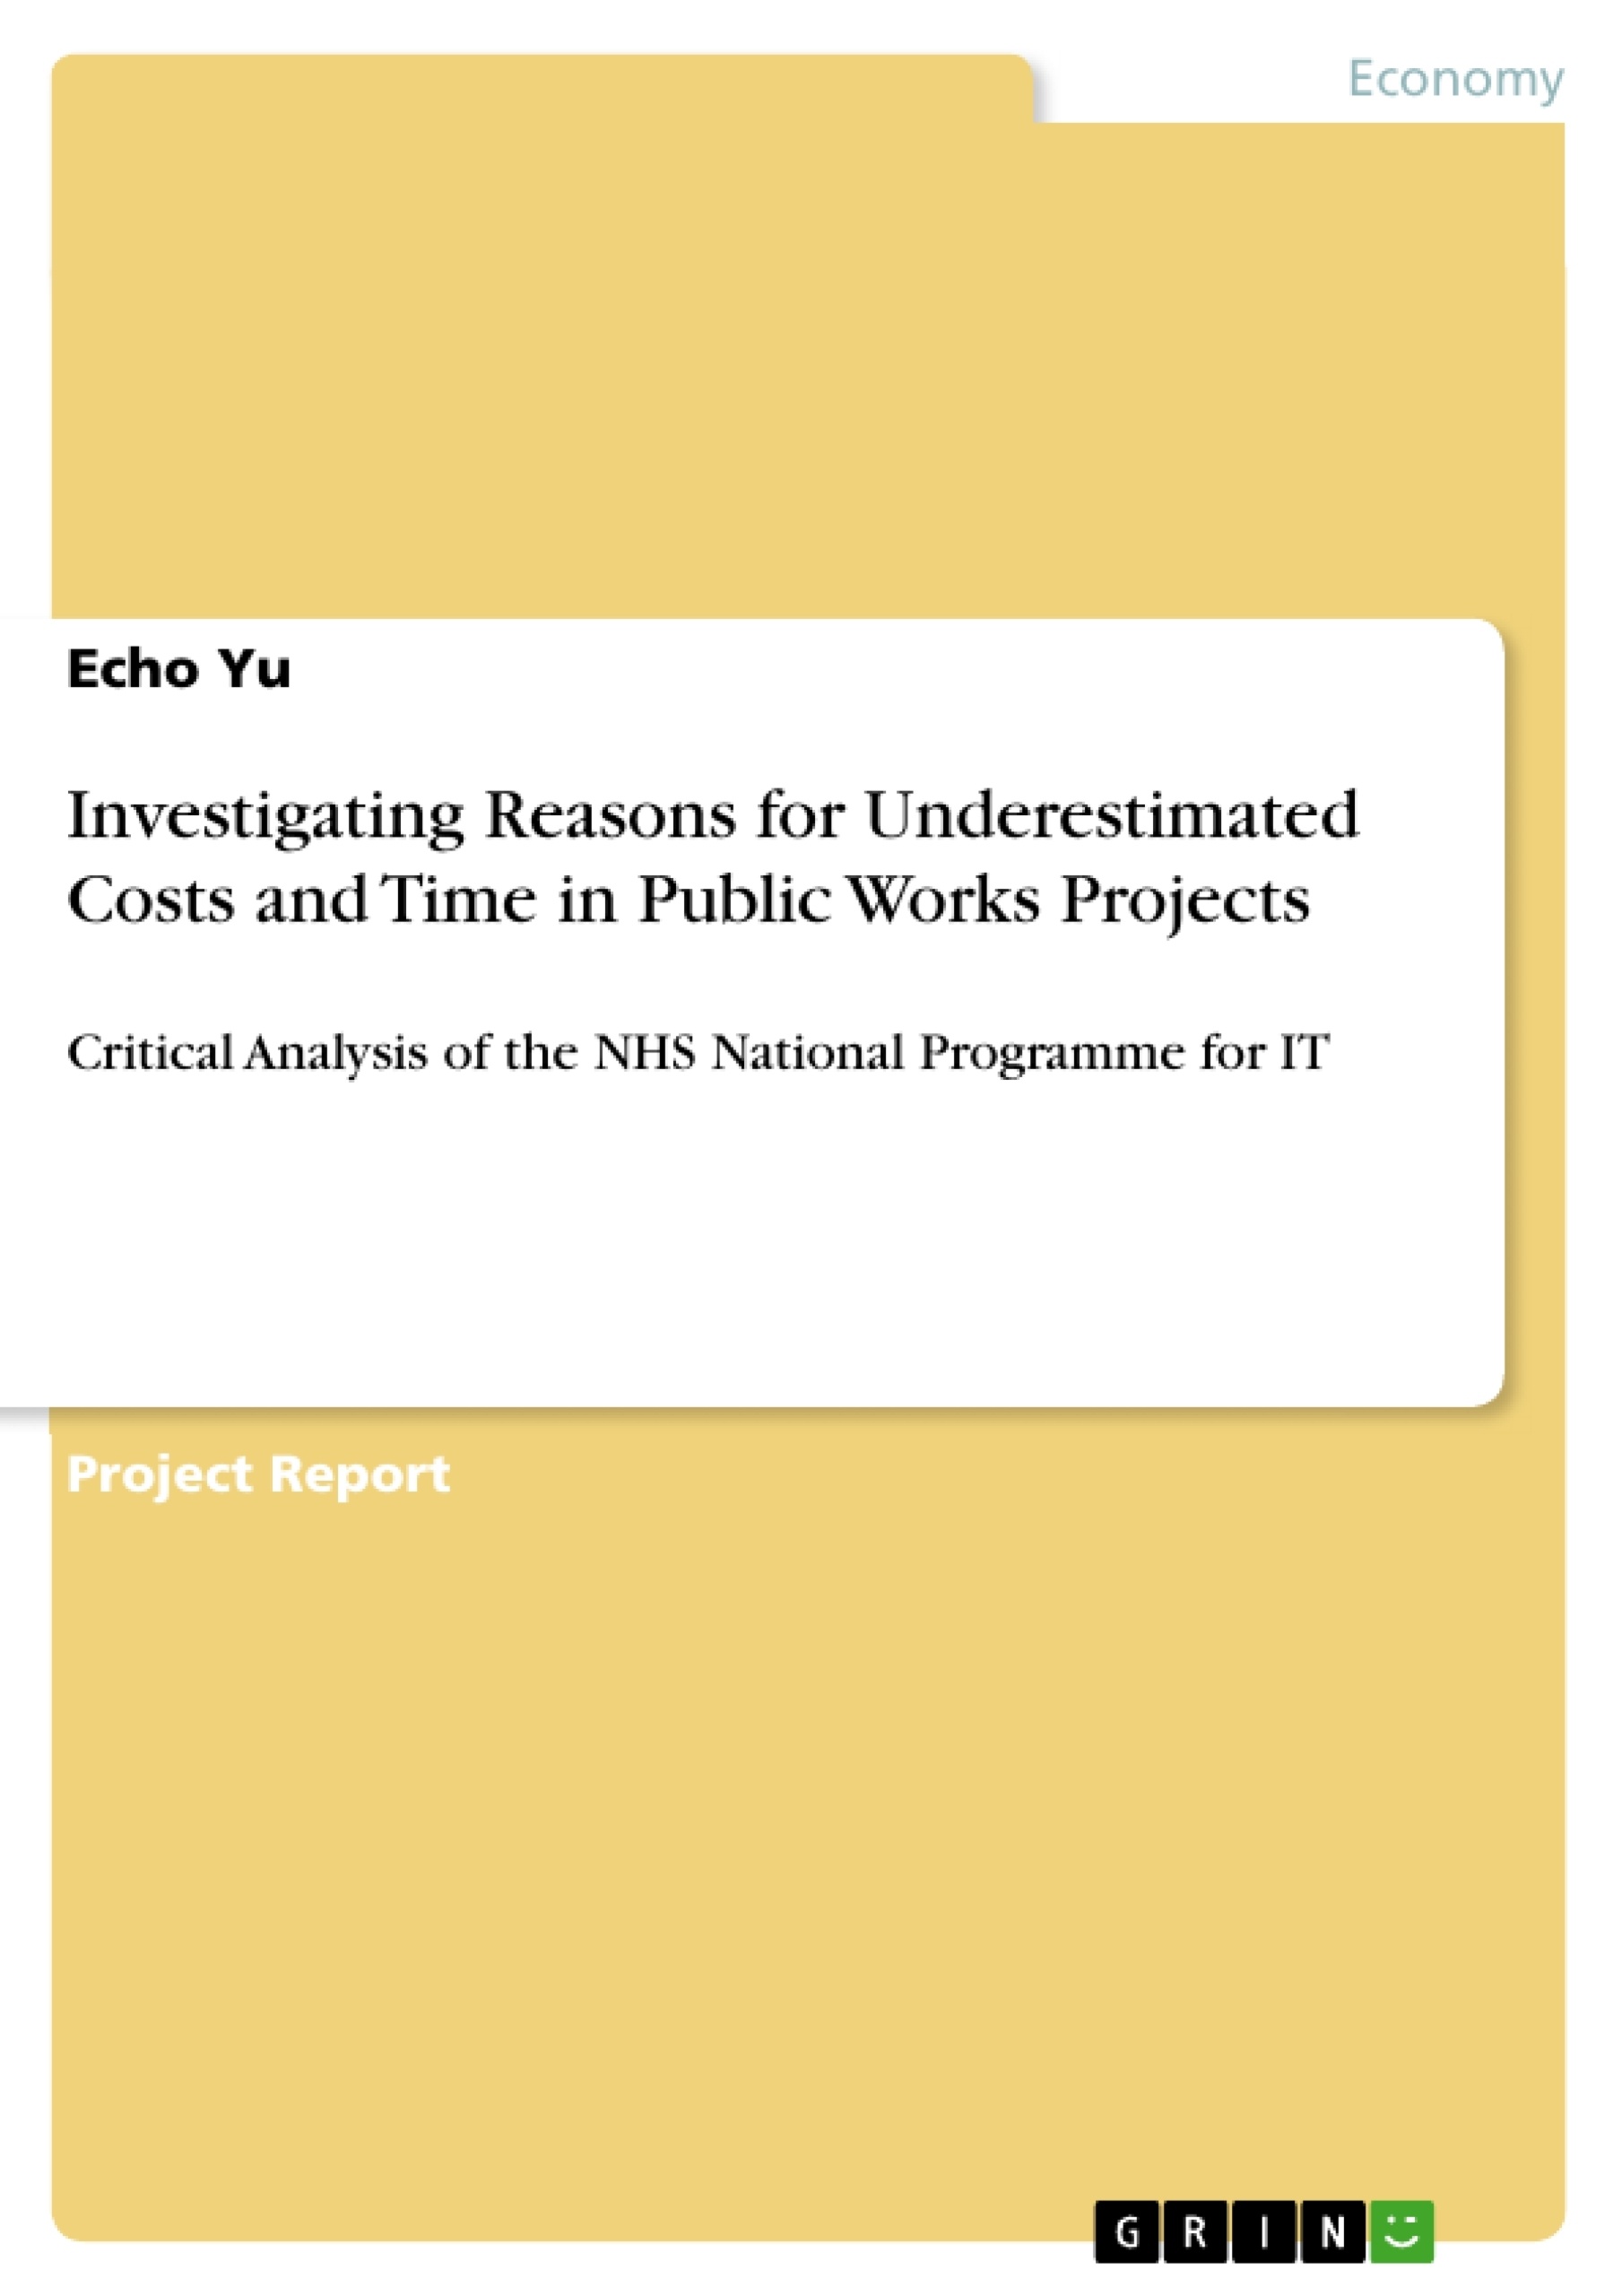 Titel: Investigating Reasons for Underestimated Costs and Time in Public Works Projects